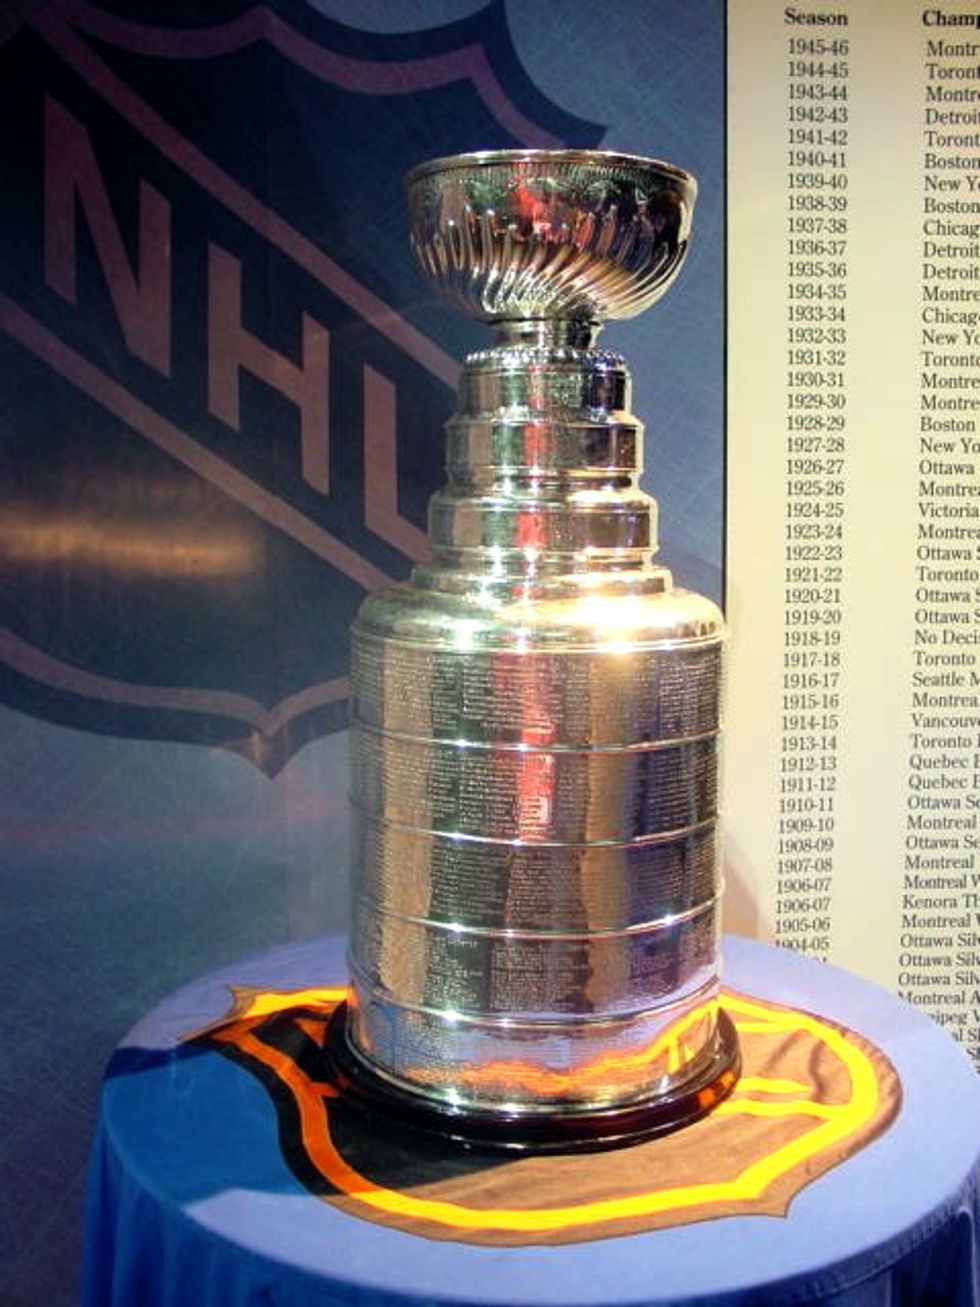 https://commons.wikimedia.org/wiki/Stanley_Cup#/media/File:StanleyCup.jpg